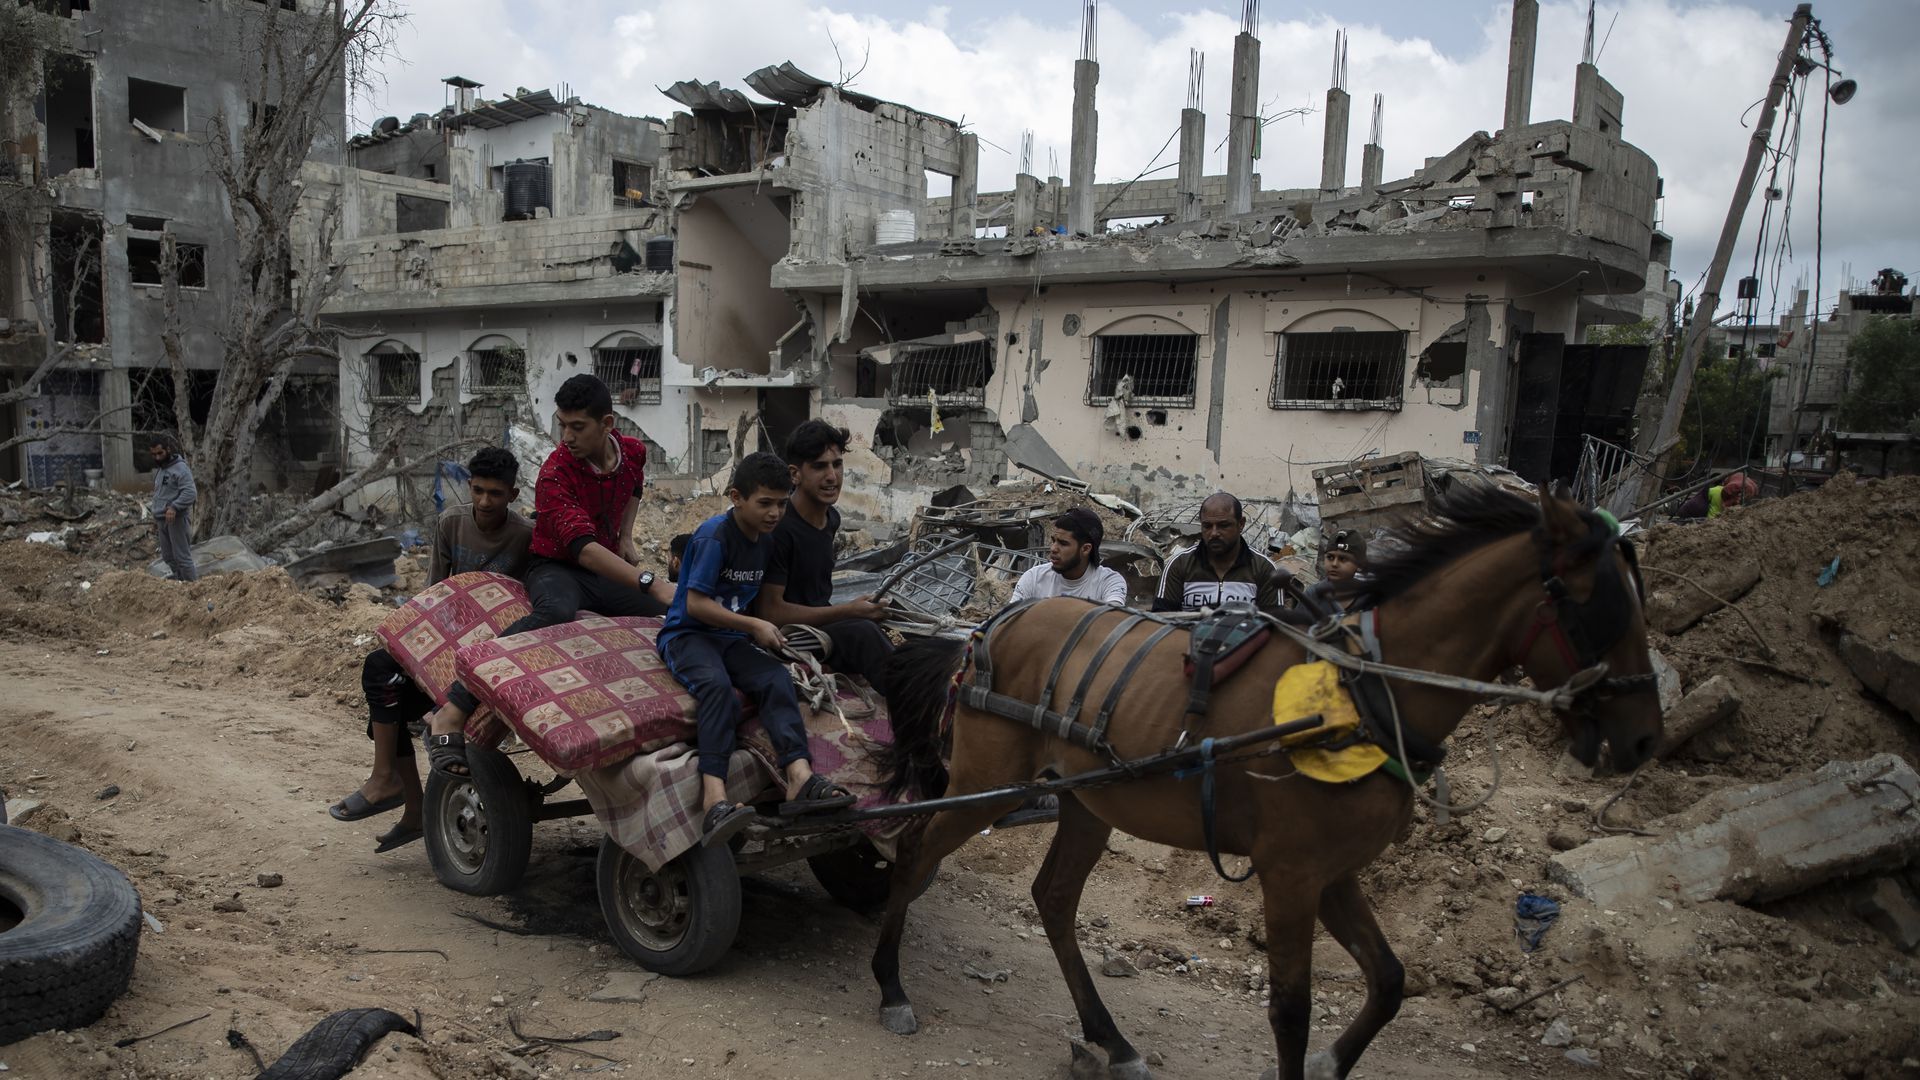 On a horse cart loaded with belongings, Palestinians return today to their home in the town of Beit Hanoun, northern Gaza Strip. Photo: Khalil Hamra/AP